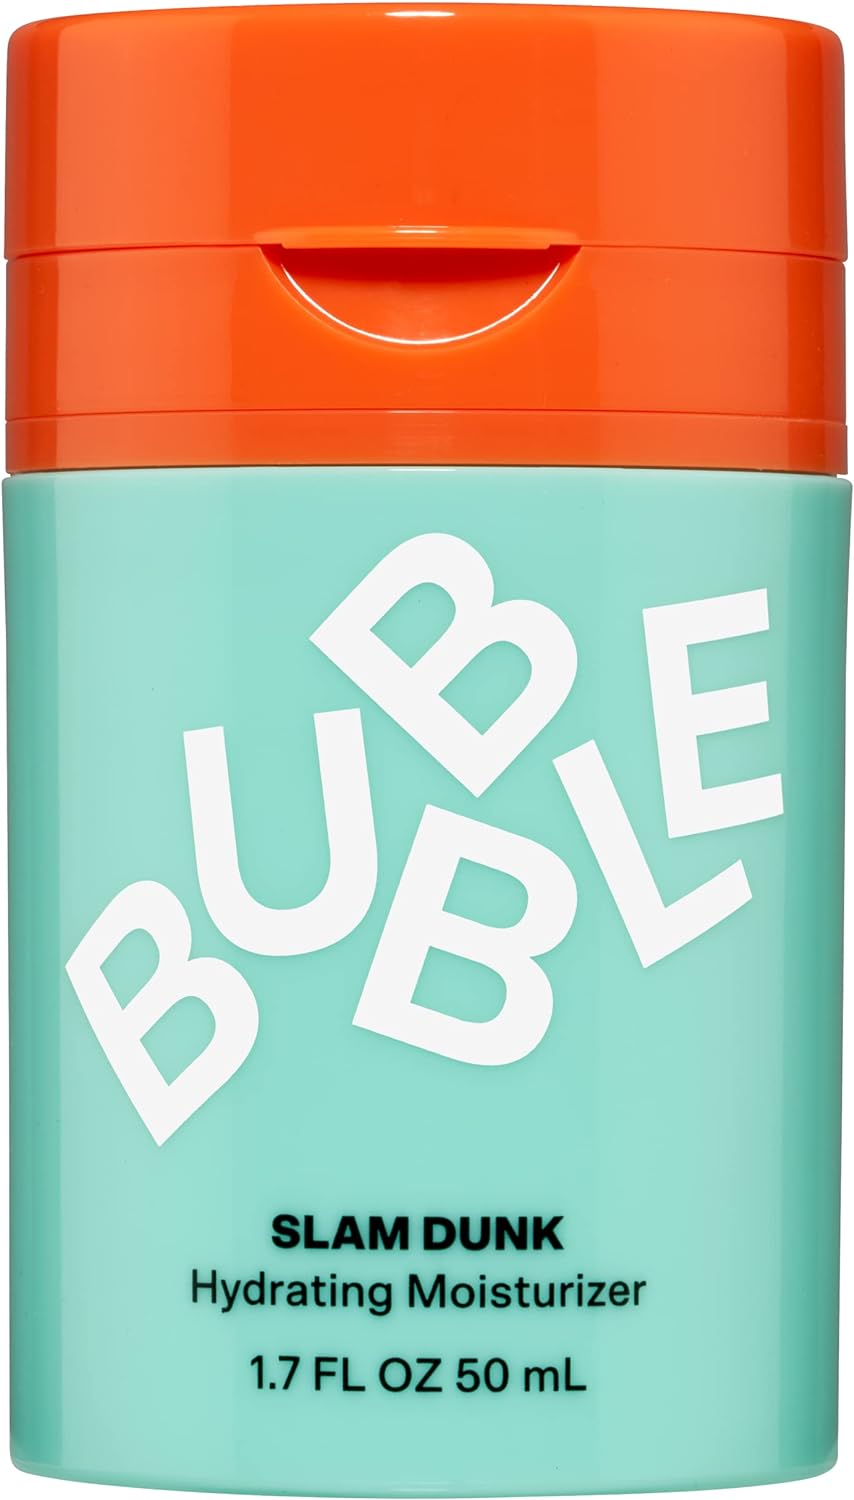 Bubble Skincare Slam Dunk Hydrating Facial Moisturizer - Natural Aloe Juice + Avocado Oil for Skin Hydration and Blue Light Protection - Daily Face Moisturizer for Sensitive Skin